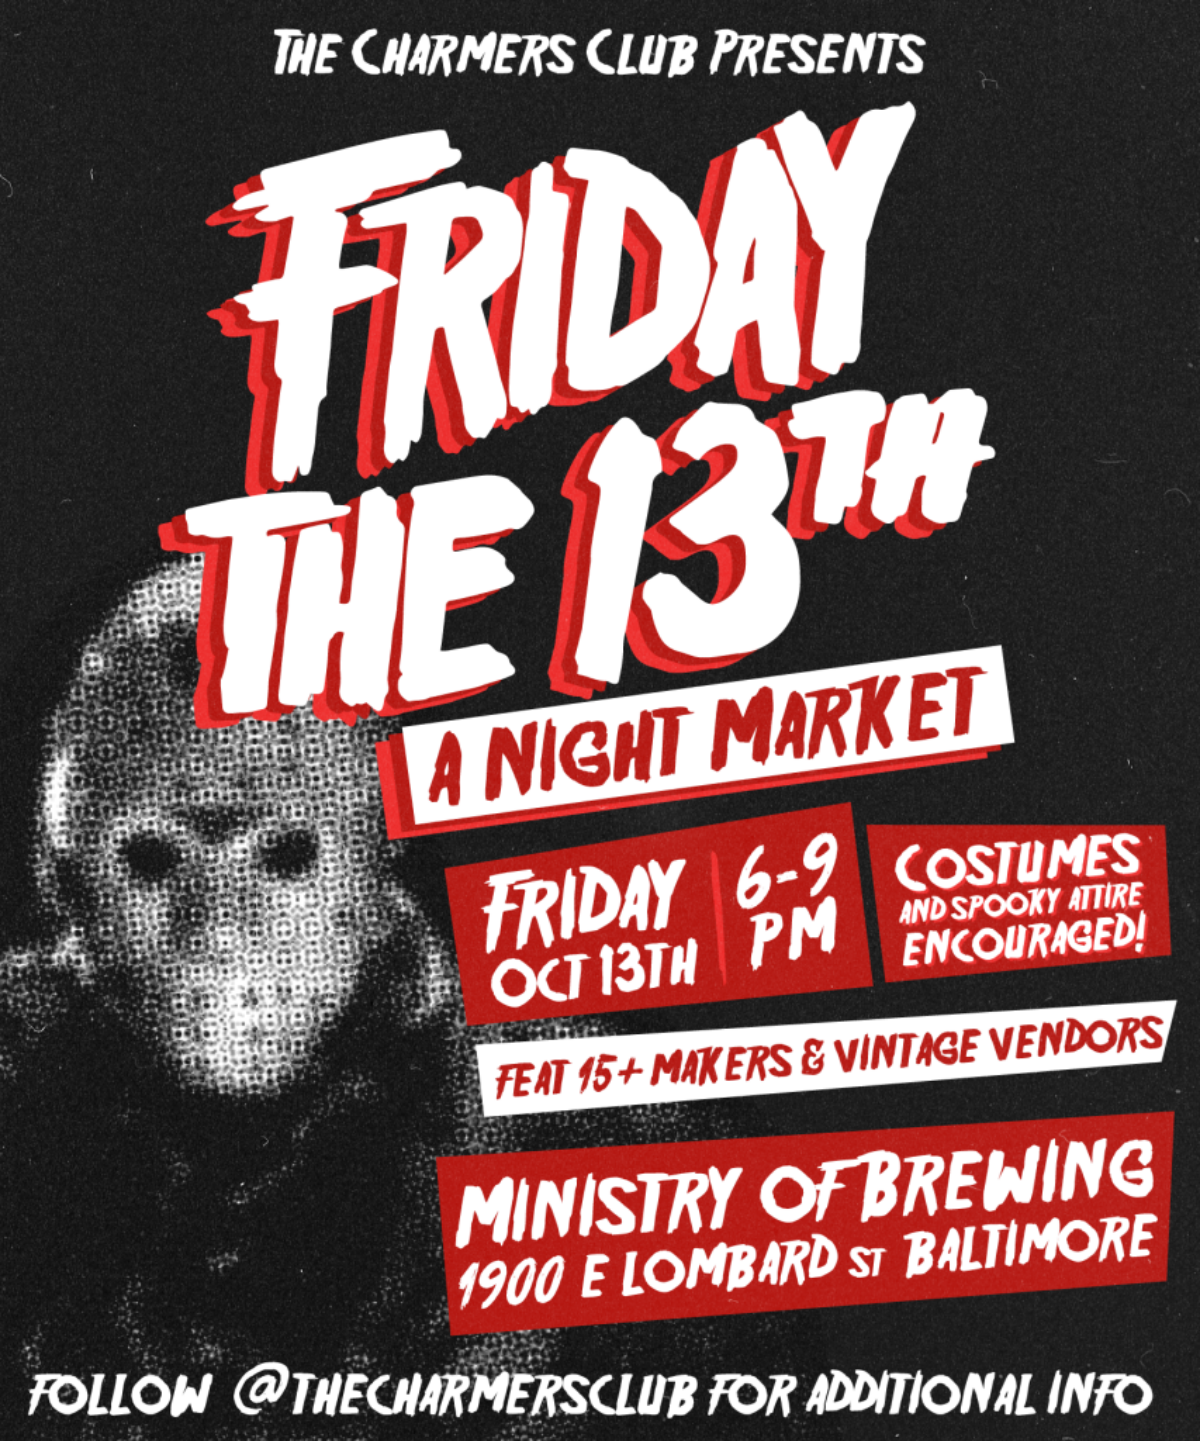 Celebrate Friday the 13th at these Corpus Christi events